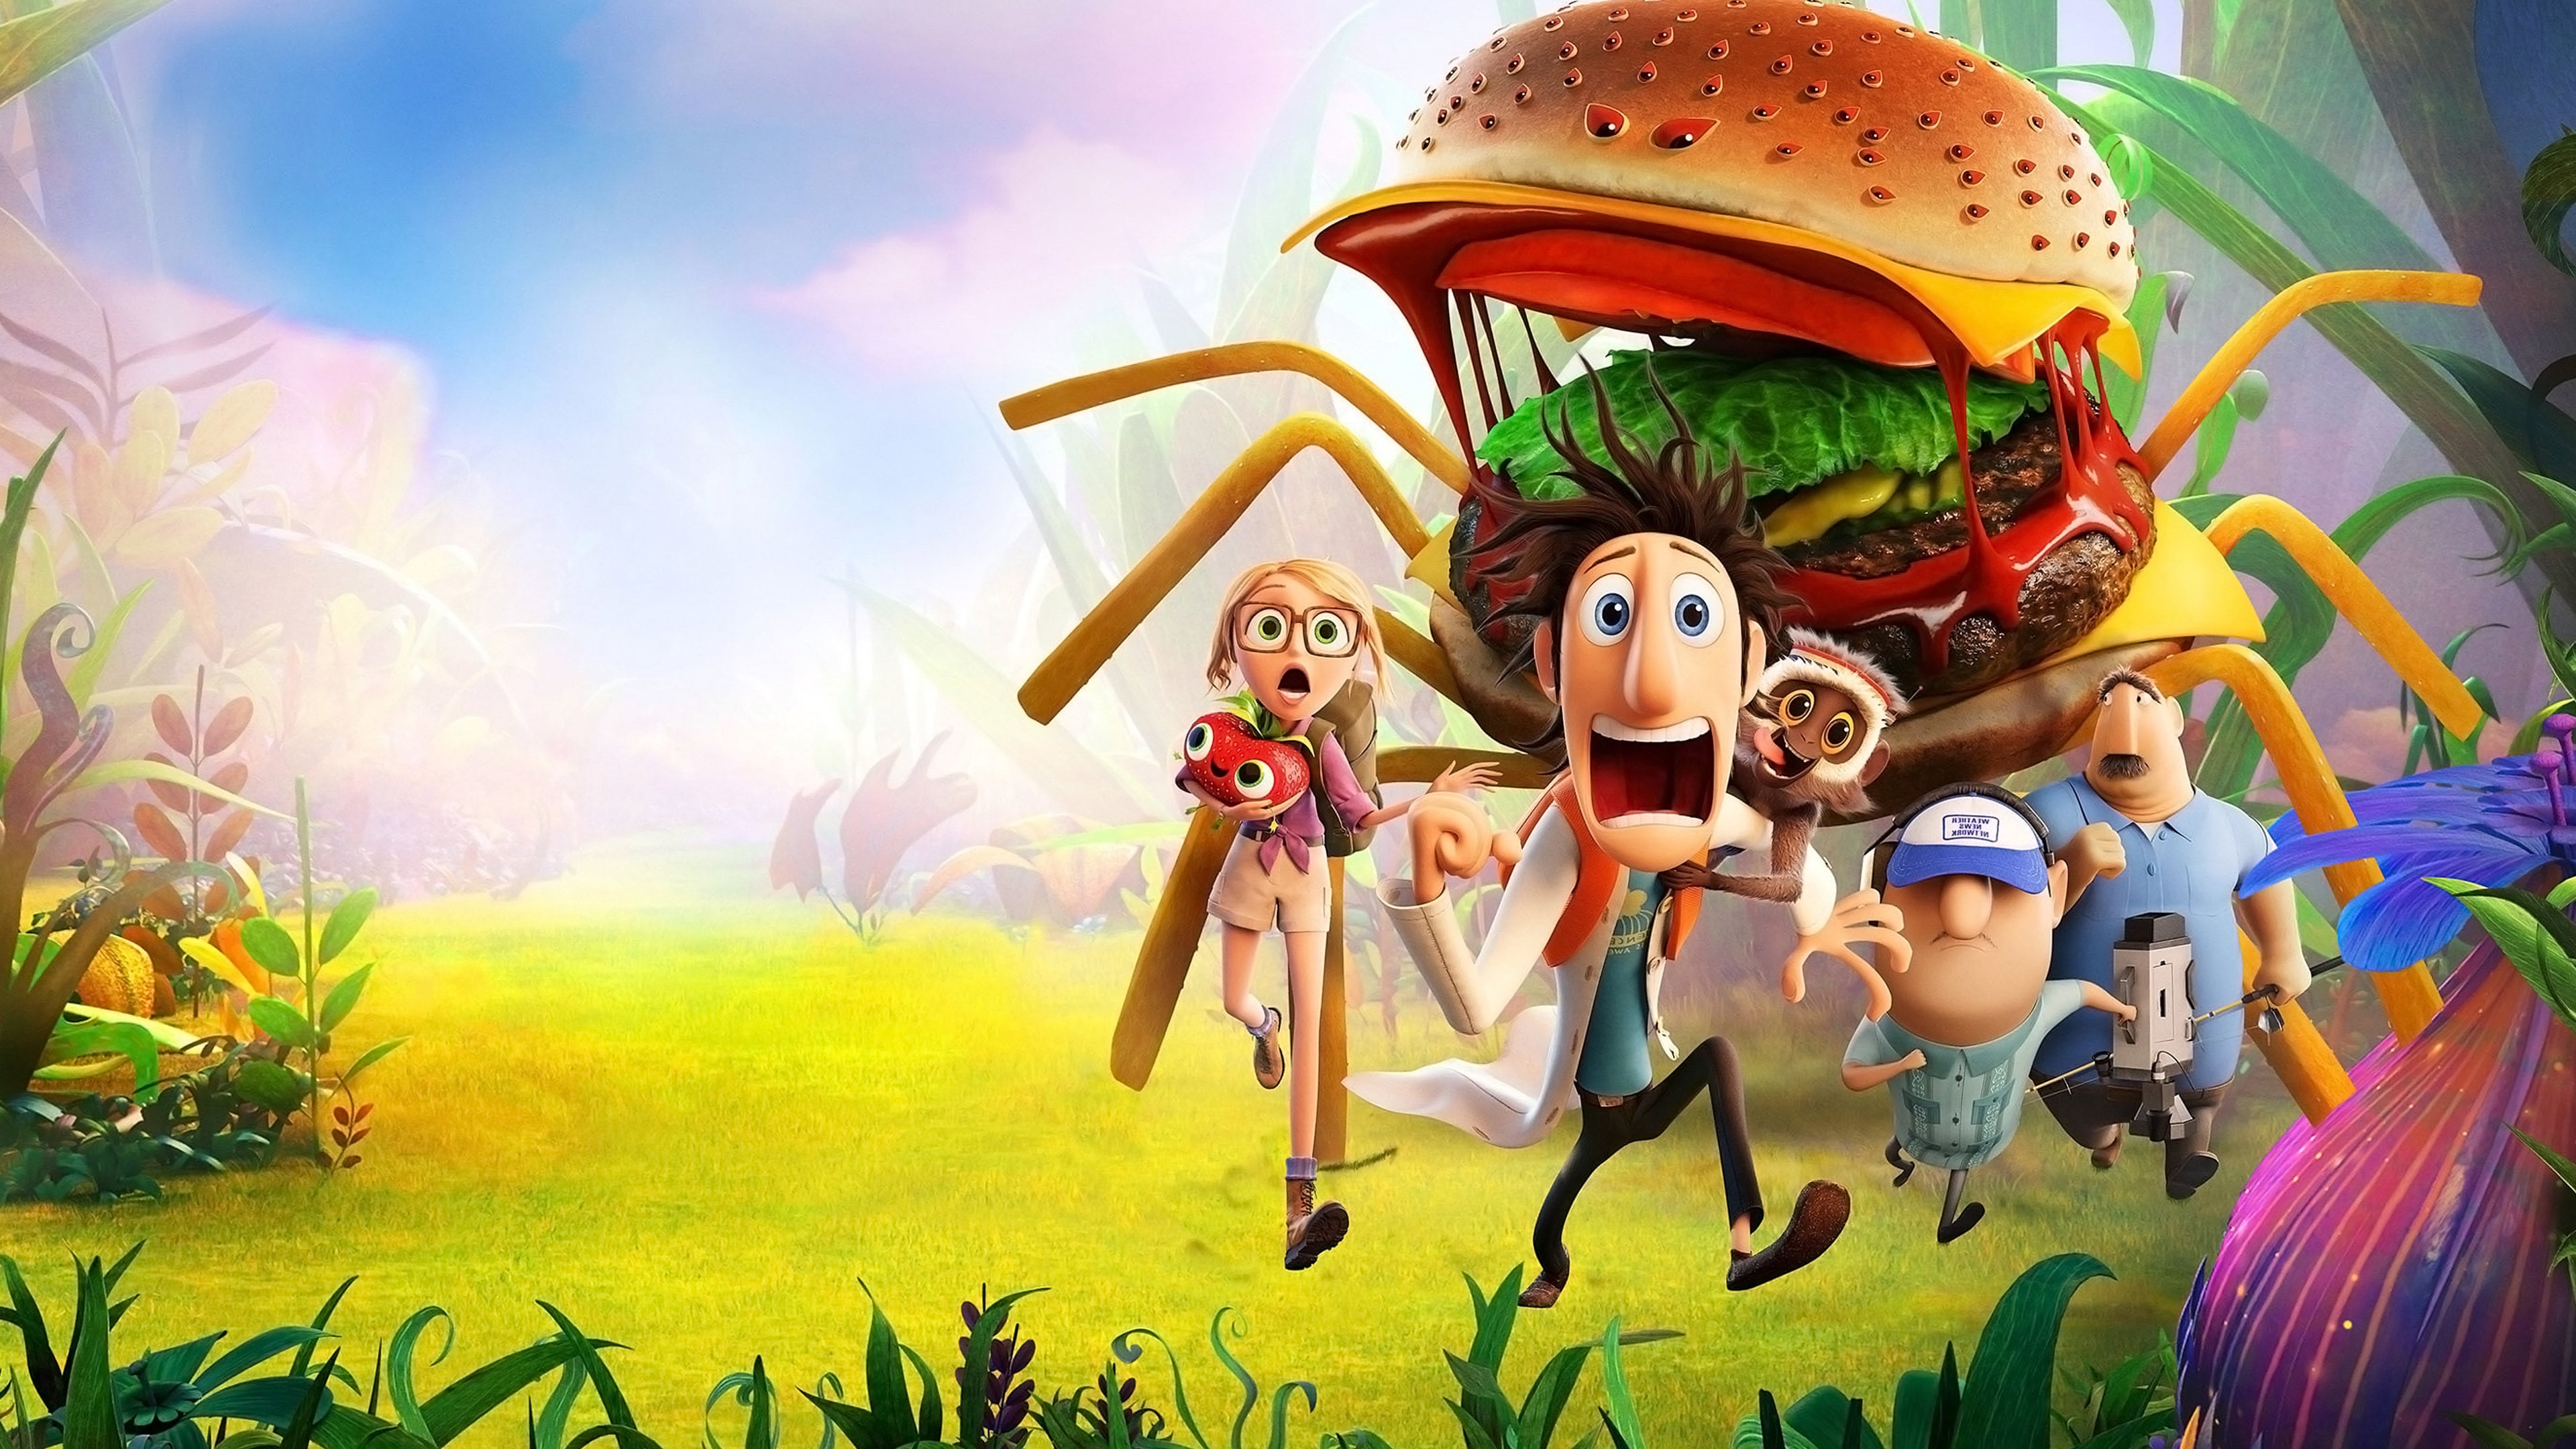 Cloudy with a Chance of Meatballs 2 Trailer. 